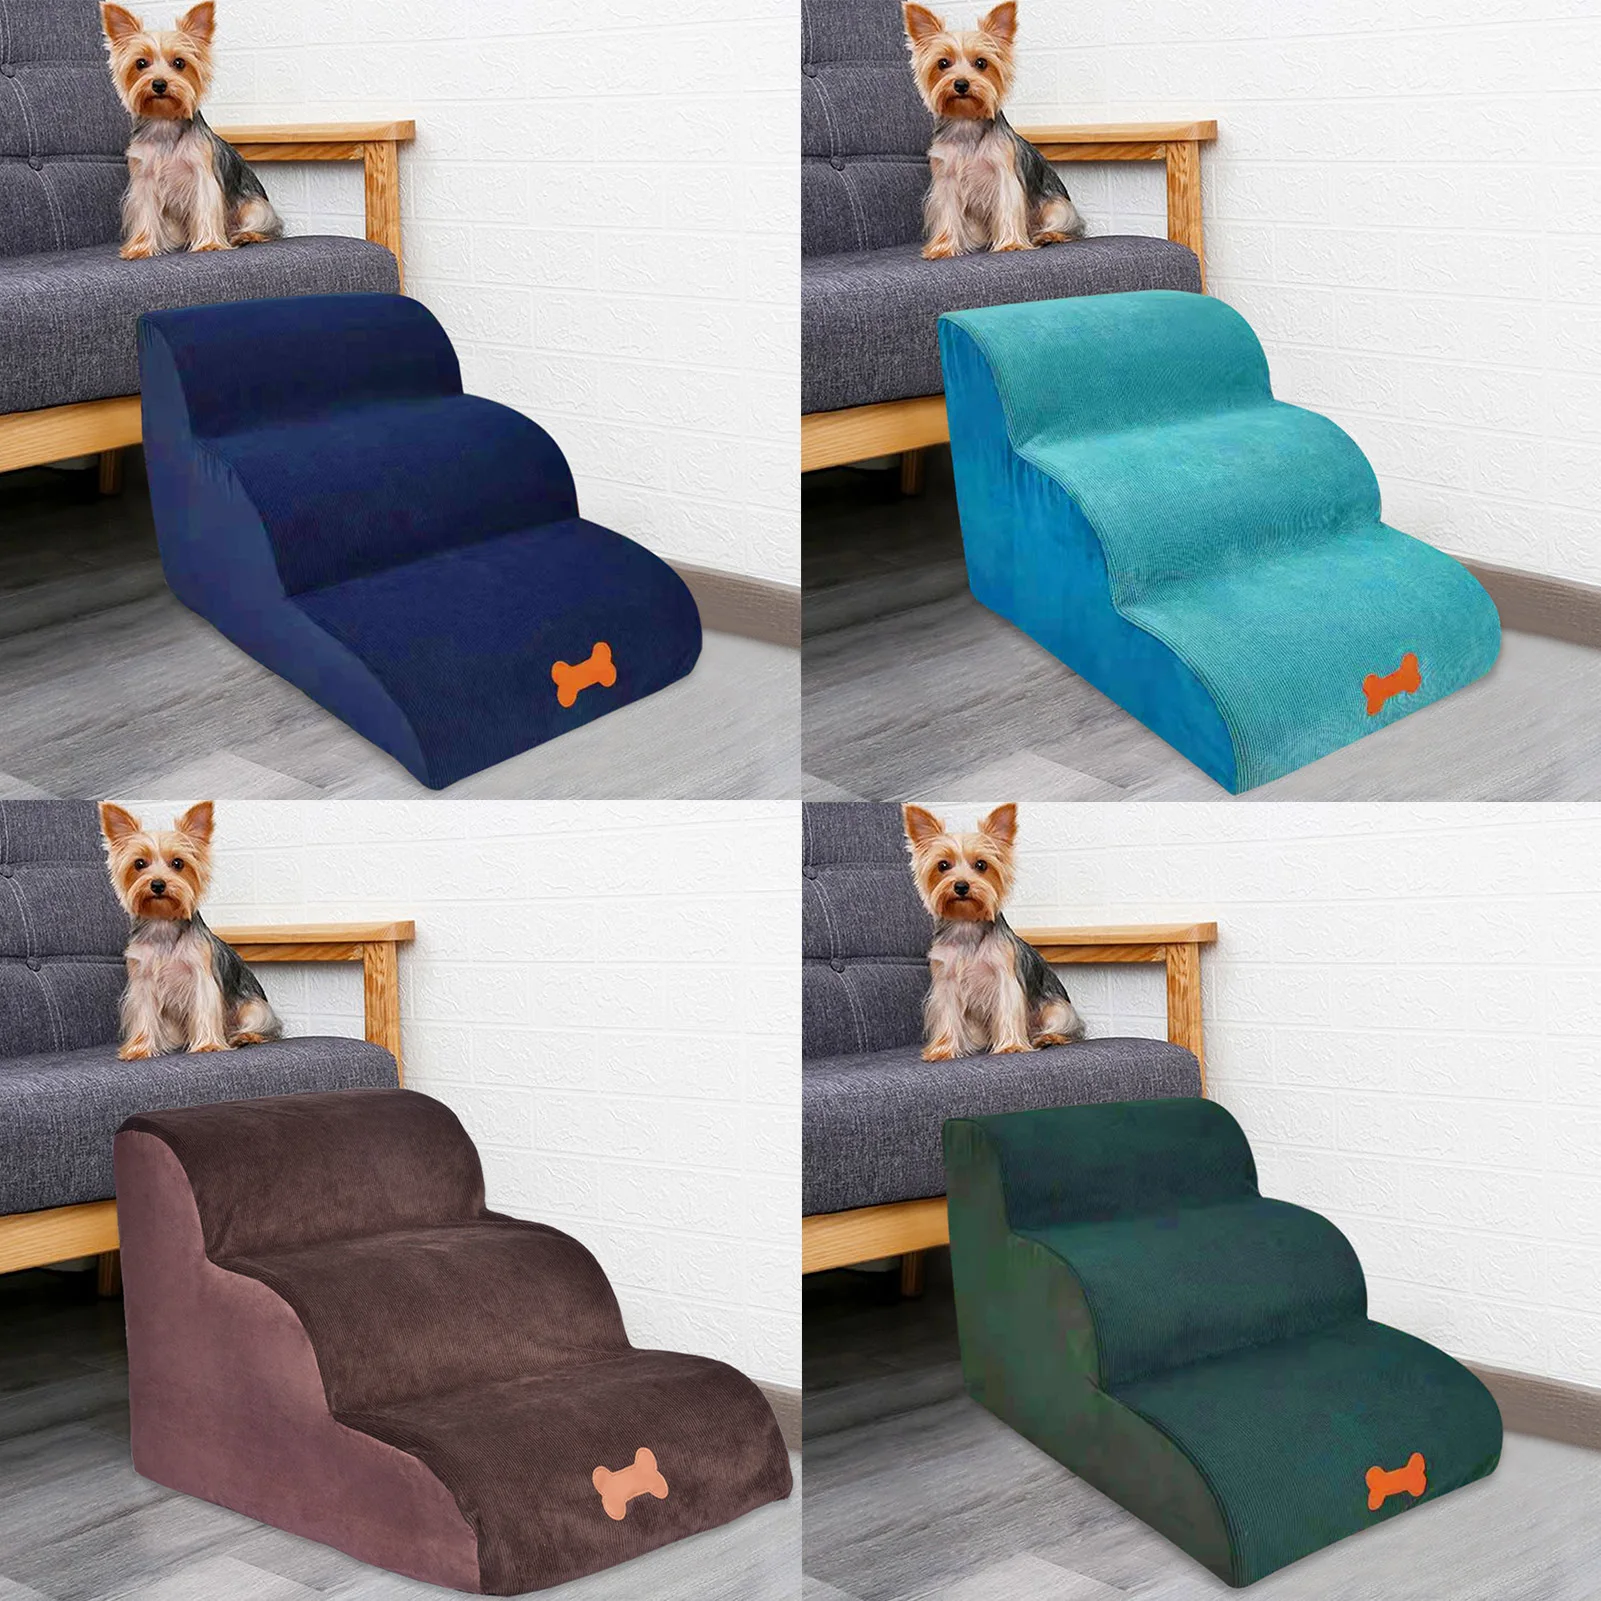 

Pet Ramp 3 Tiers Dog Ramps Stairs Non-Slip Pet Steps For Small Dogs And Cats Removable High-Density Sponge Pet Stair Ladder